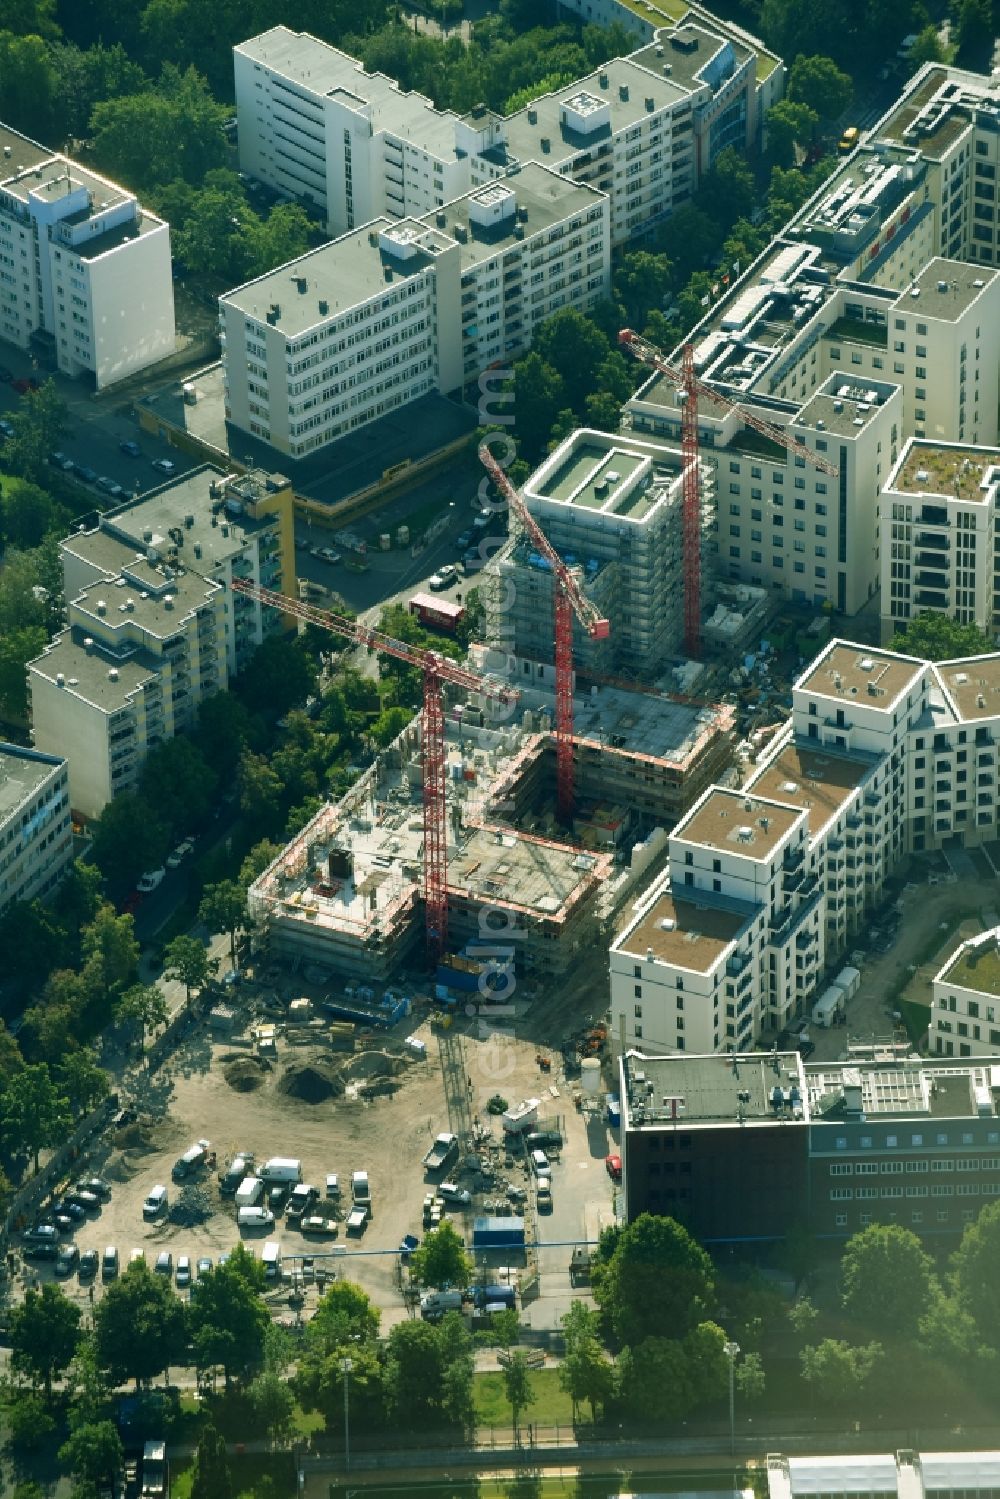 Aerial image Berlin - Construction project for the new construction of residential and office buildings, for example on the northern plot of the Moeckern, corner Stresemannstrasse a 7-storey office building, the housing project Metronome and the residential project Yours from Reggeborgh PE Deutschland GmbH & Co.KG, a residential and commercial building on the adjacent area developed by Kondor Wessels Wohnen Berlin GmbH and a new building of the German Bundeswehr Association e. V. in Berlin, Germany